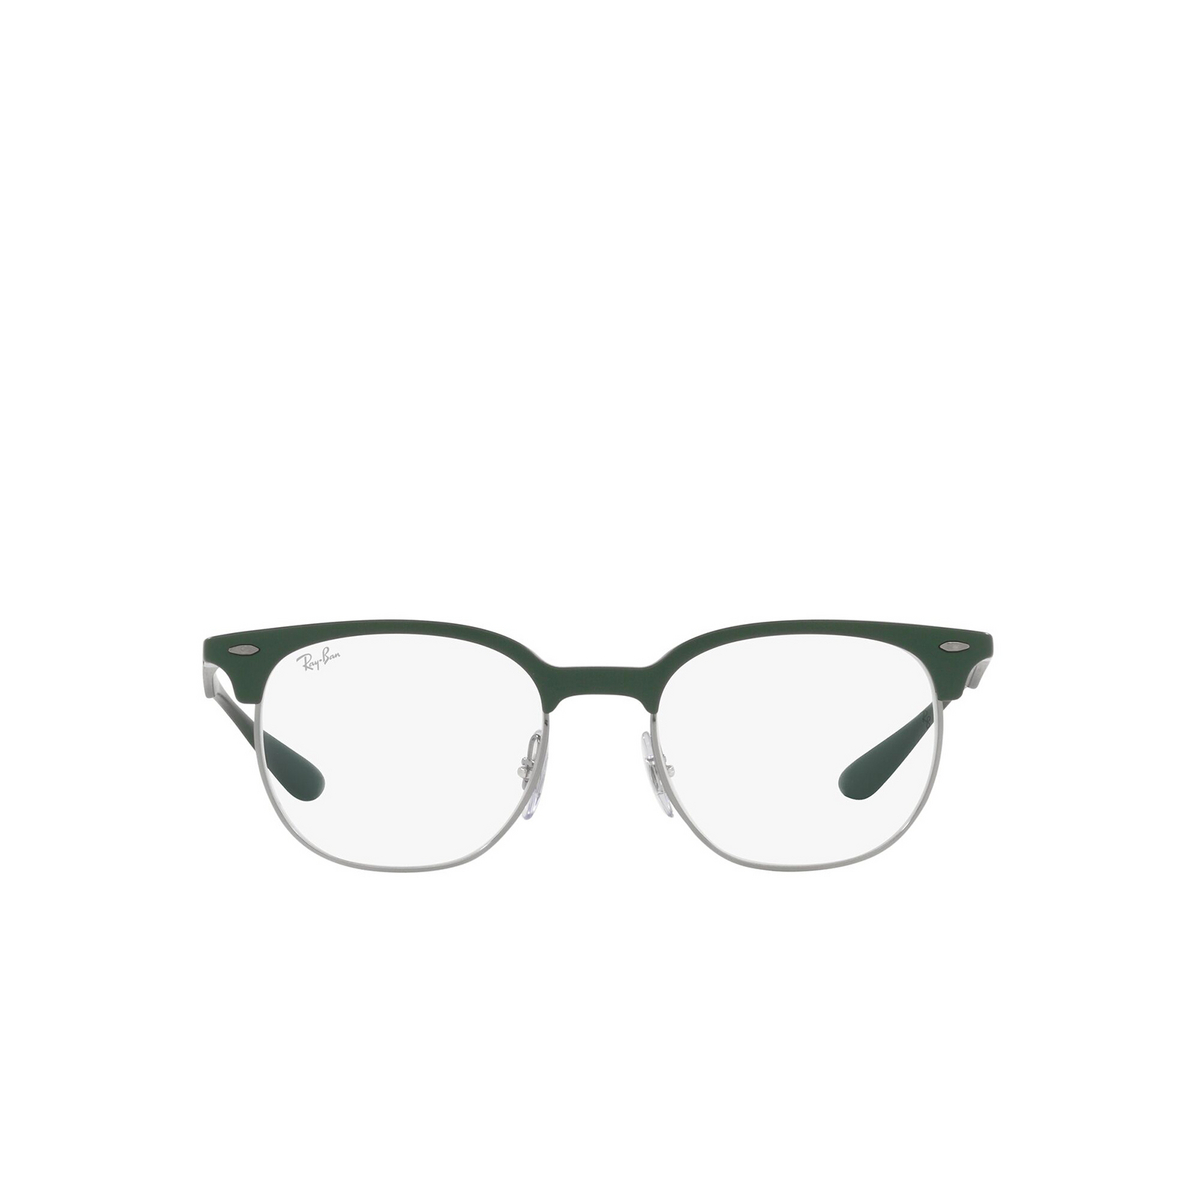 Ray-Ban® Square Eyeglasses: RX7186 color Sand Green 8062 - front view.